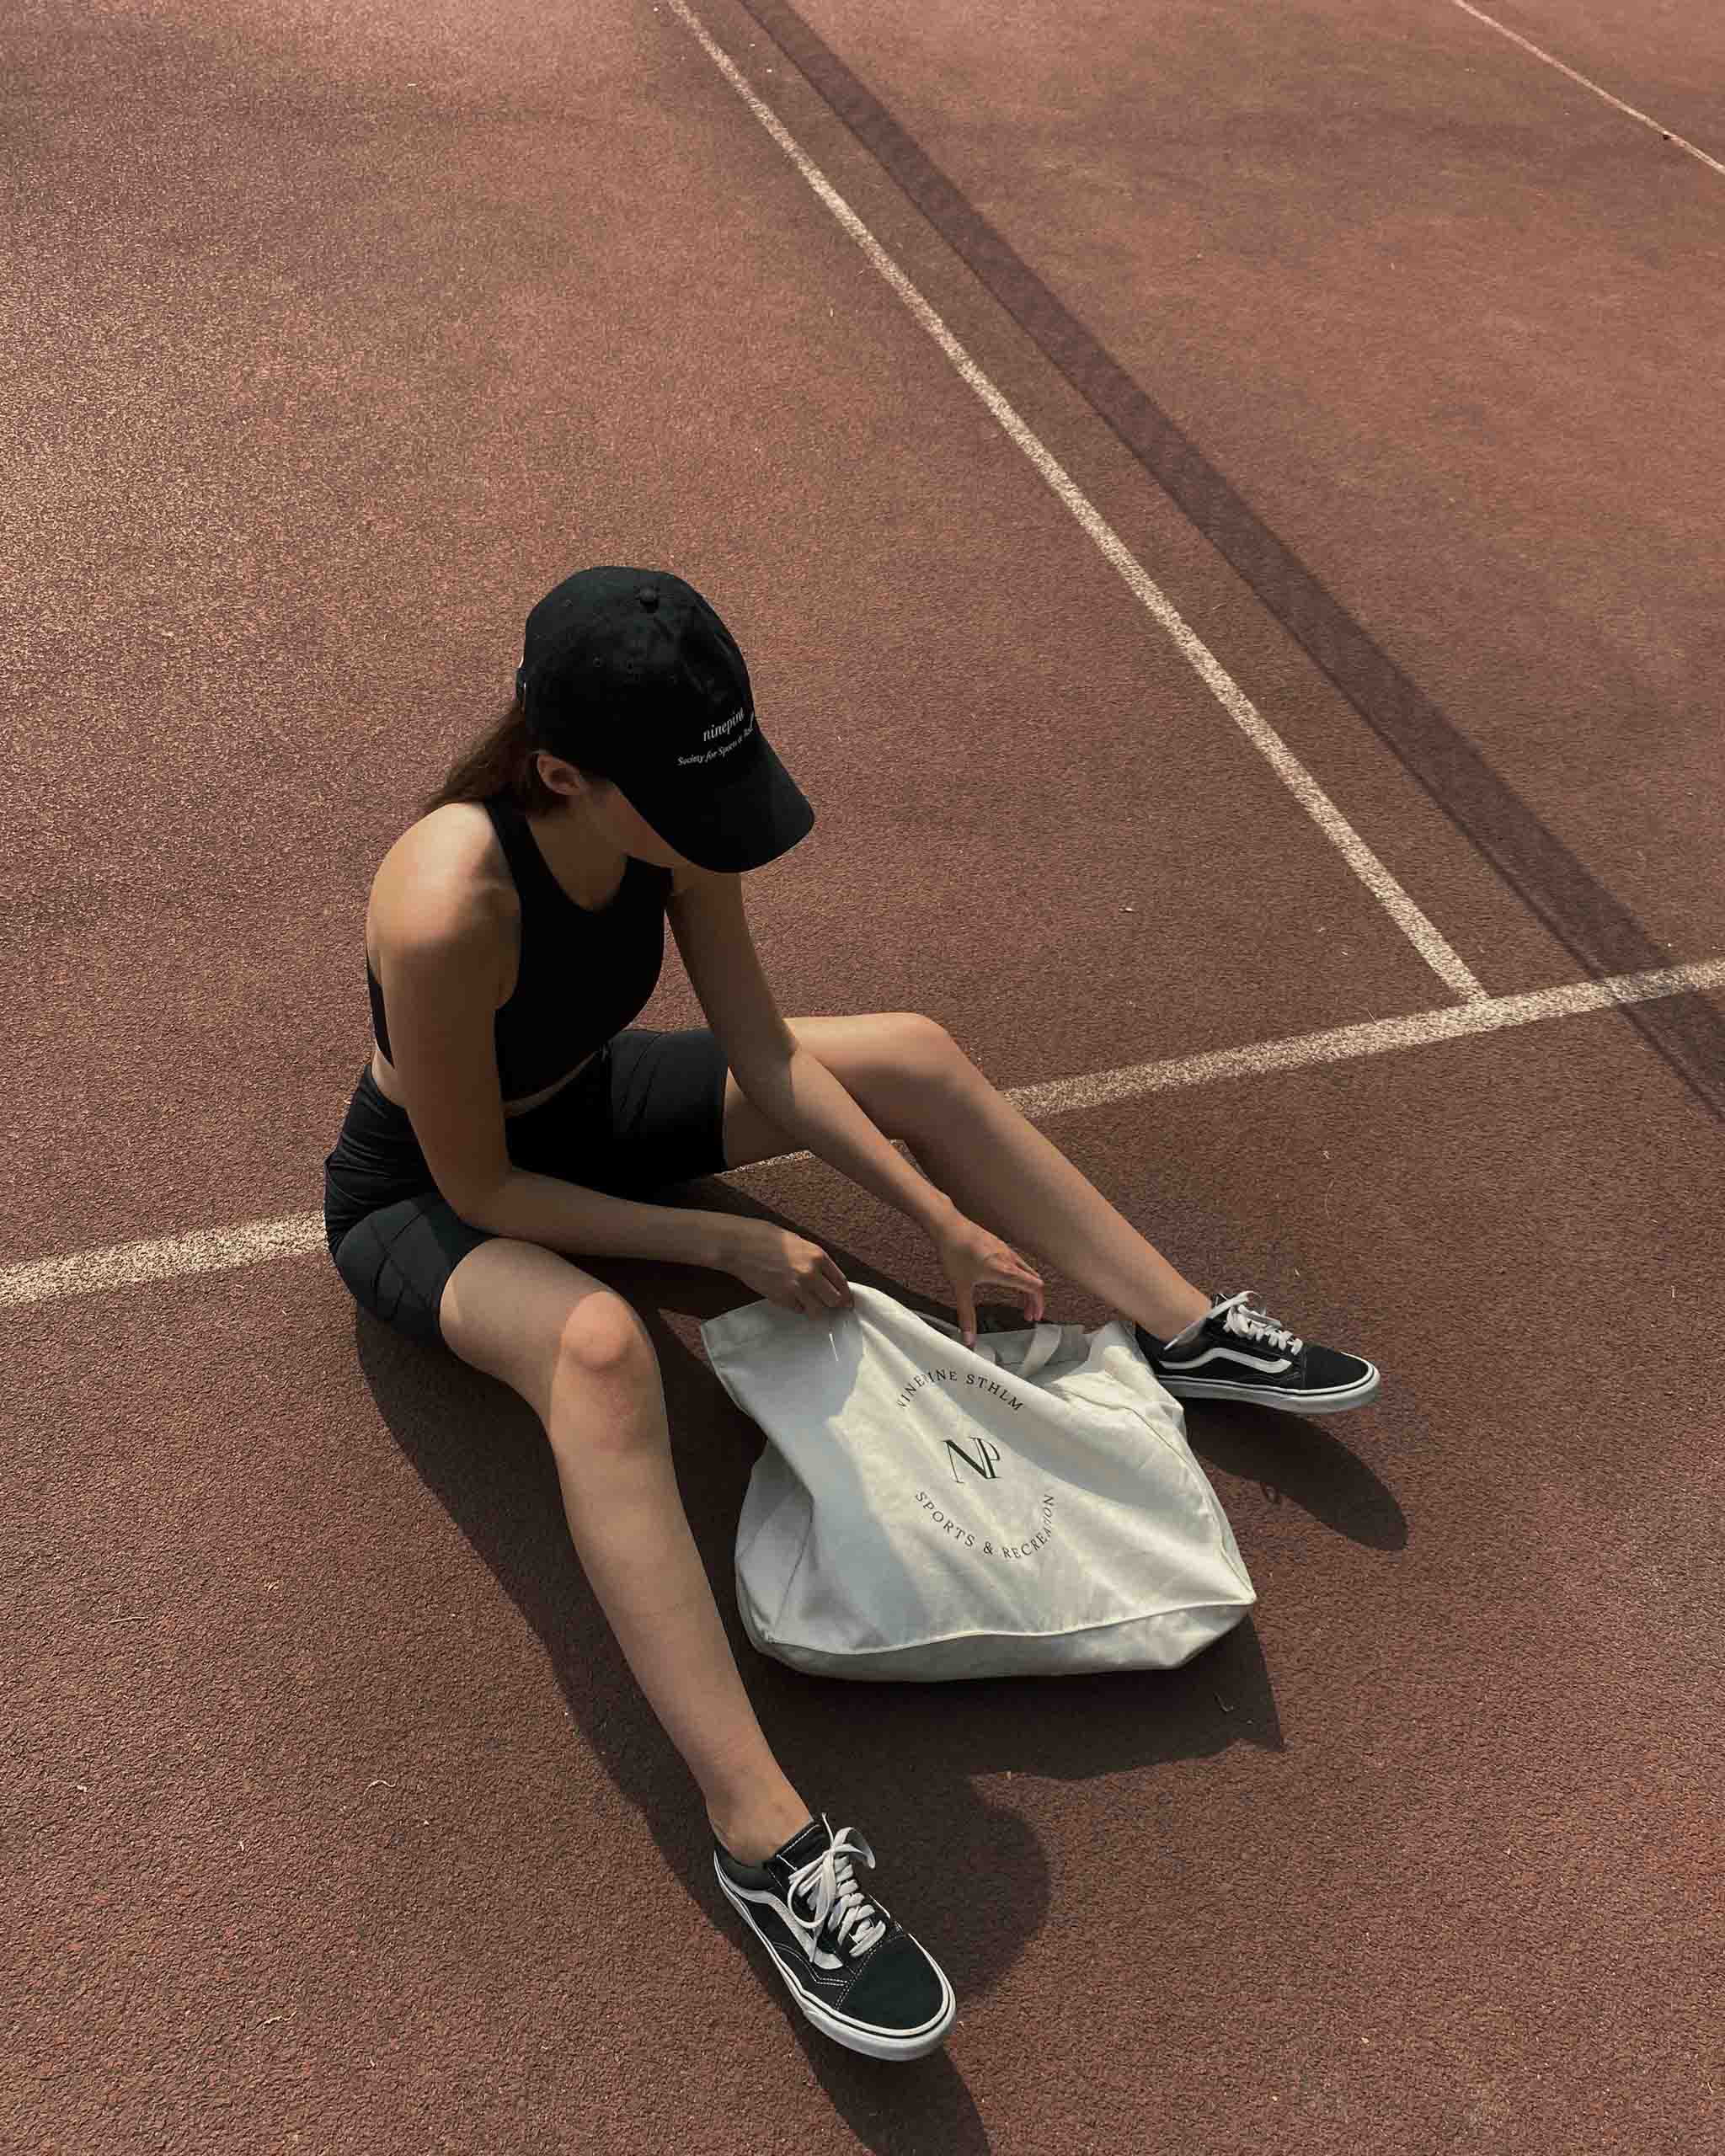 Girl in ninepine cap sitting on running track looking through her canvas tote bag